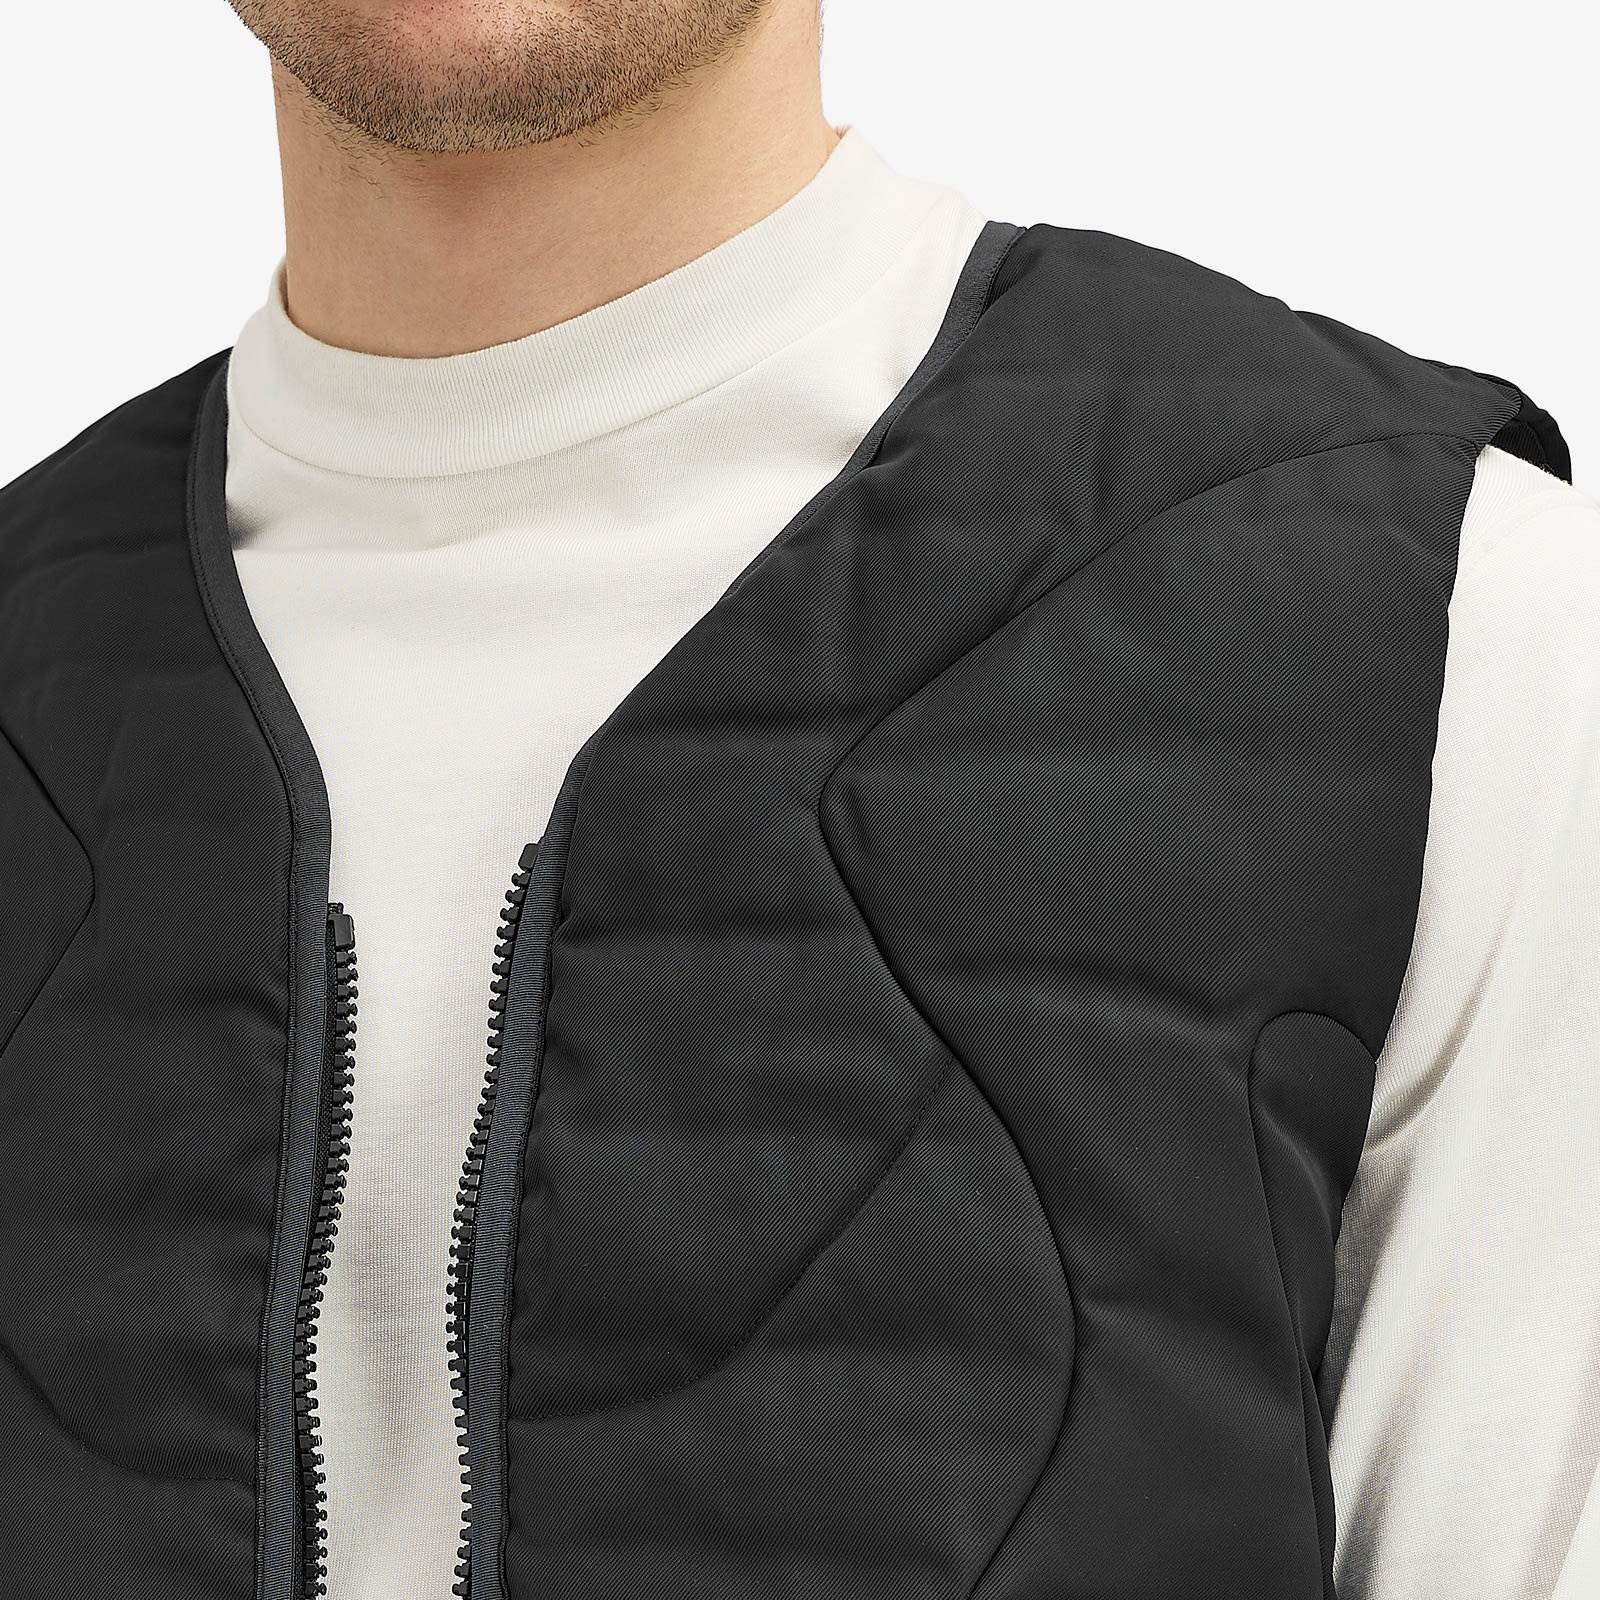 Nike Tech Pack Insulated Atlas Vest - 5